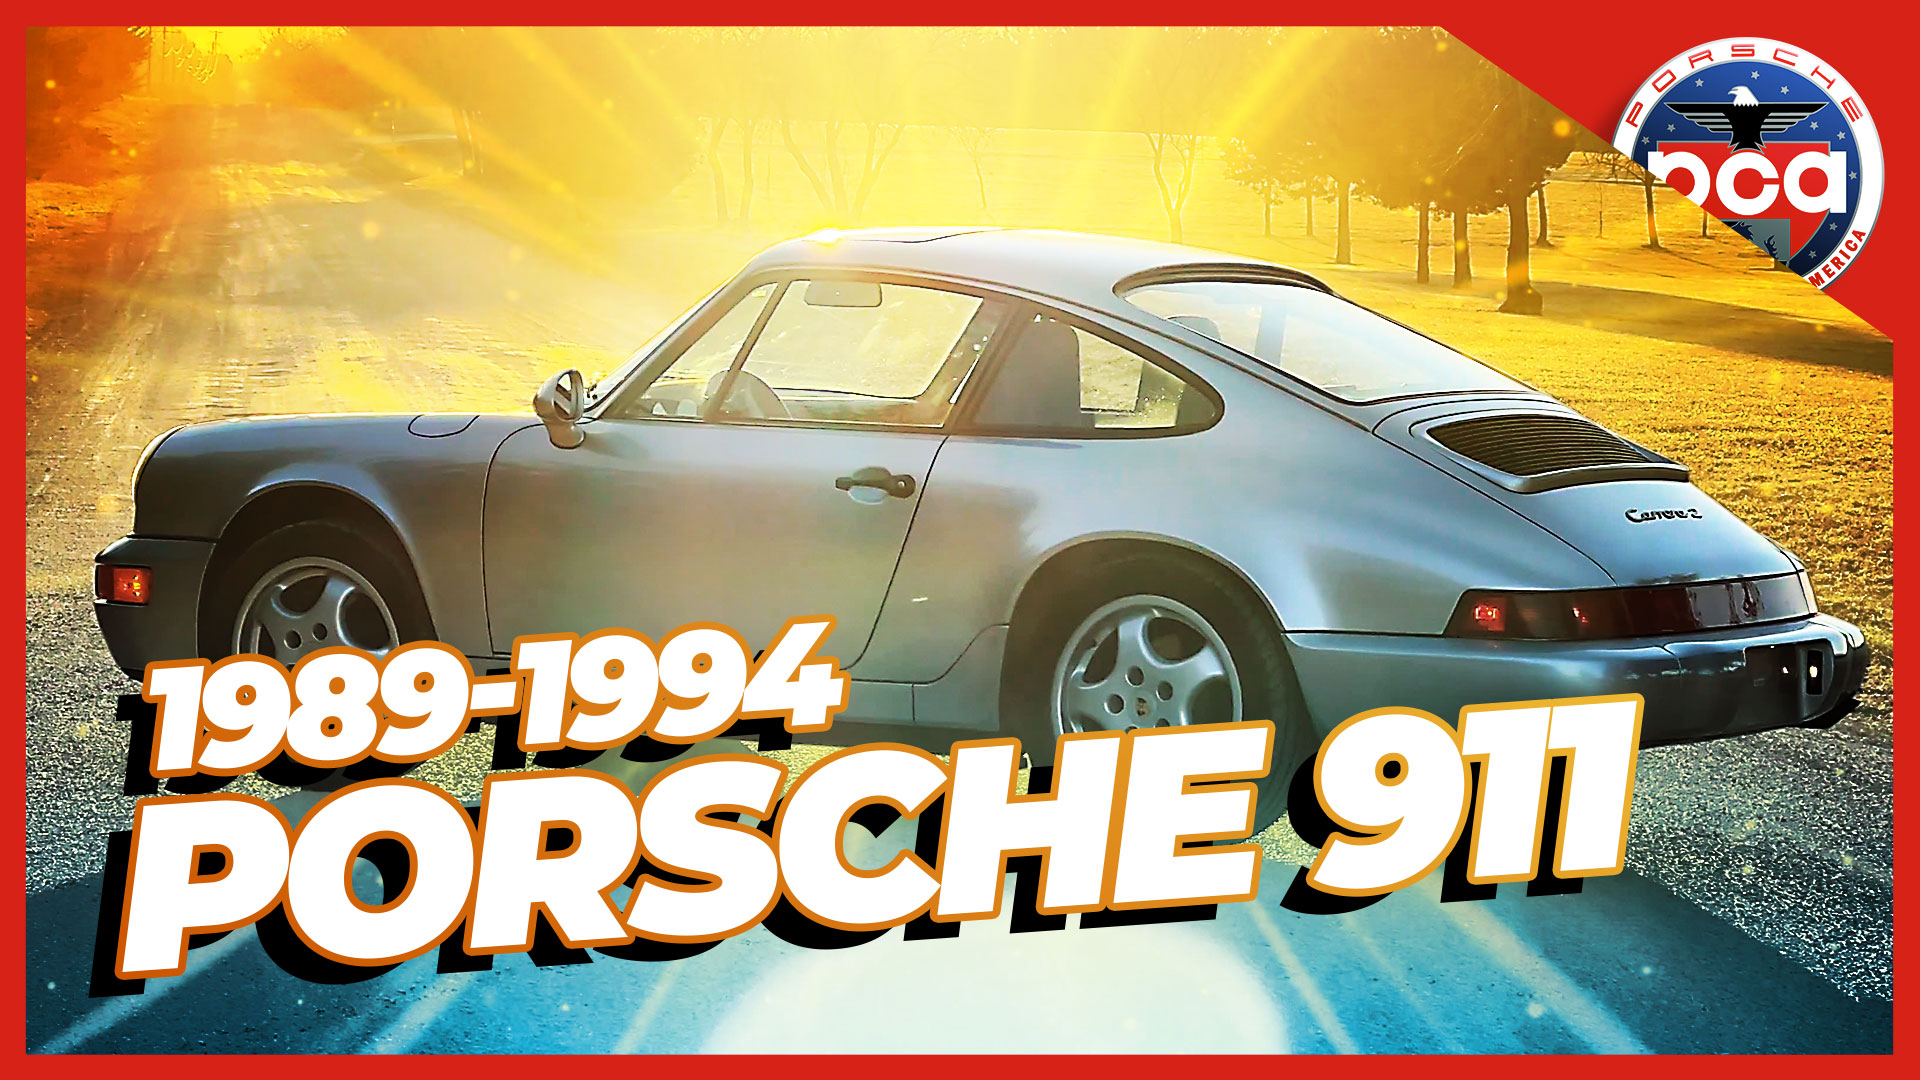 Porsche Club of America - 1989-1994 Porsche 911: Everything you need to know about the 964 generation | PCA Spotlight